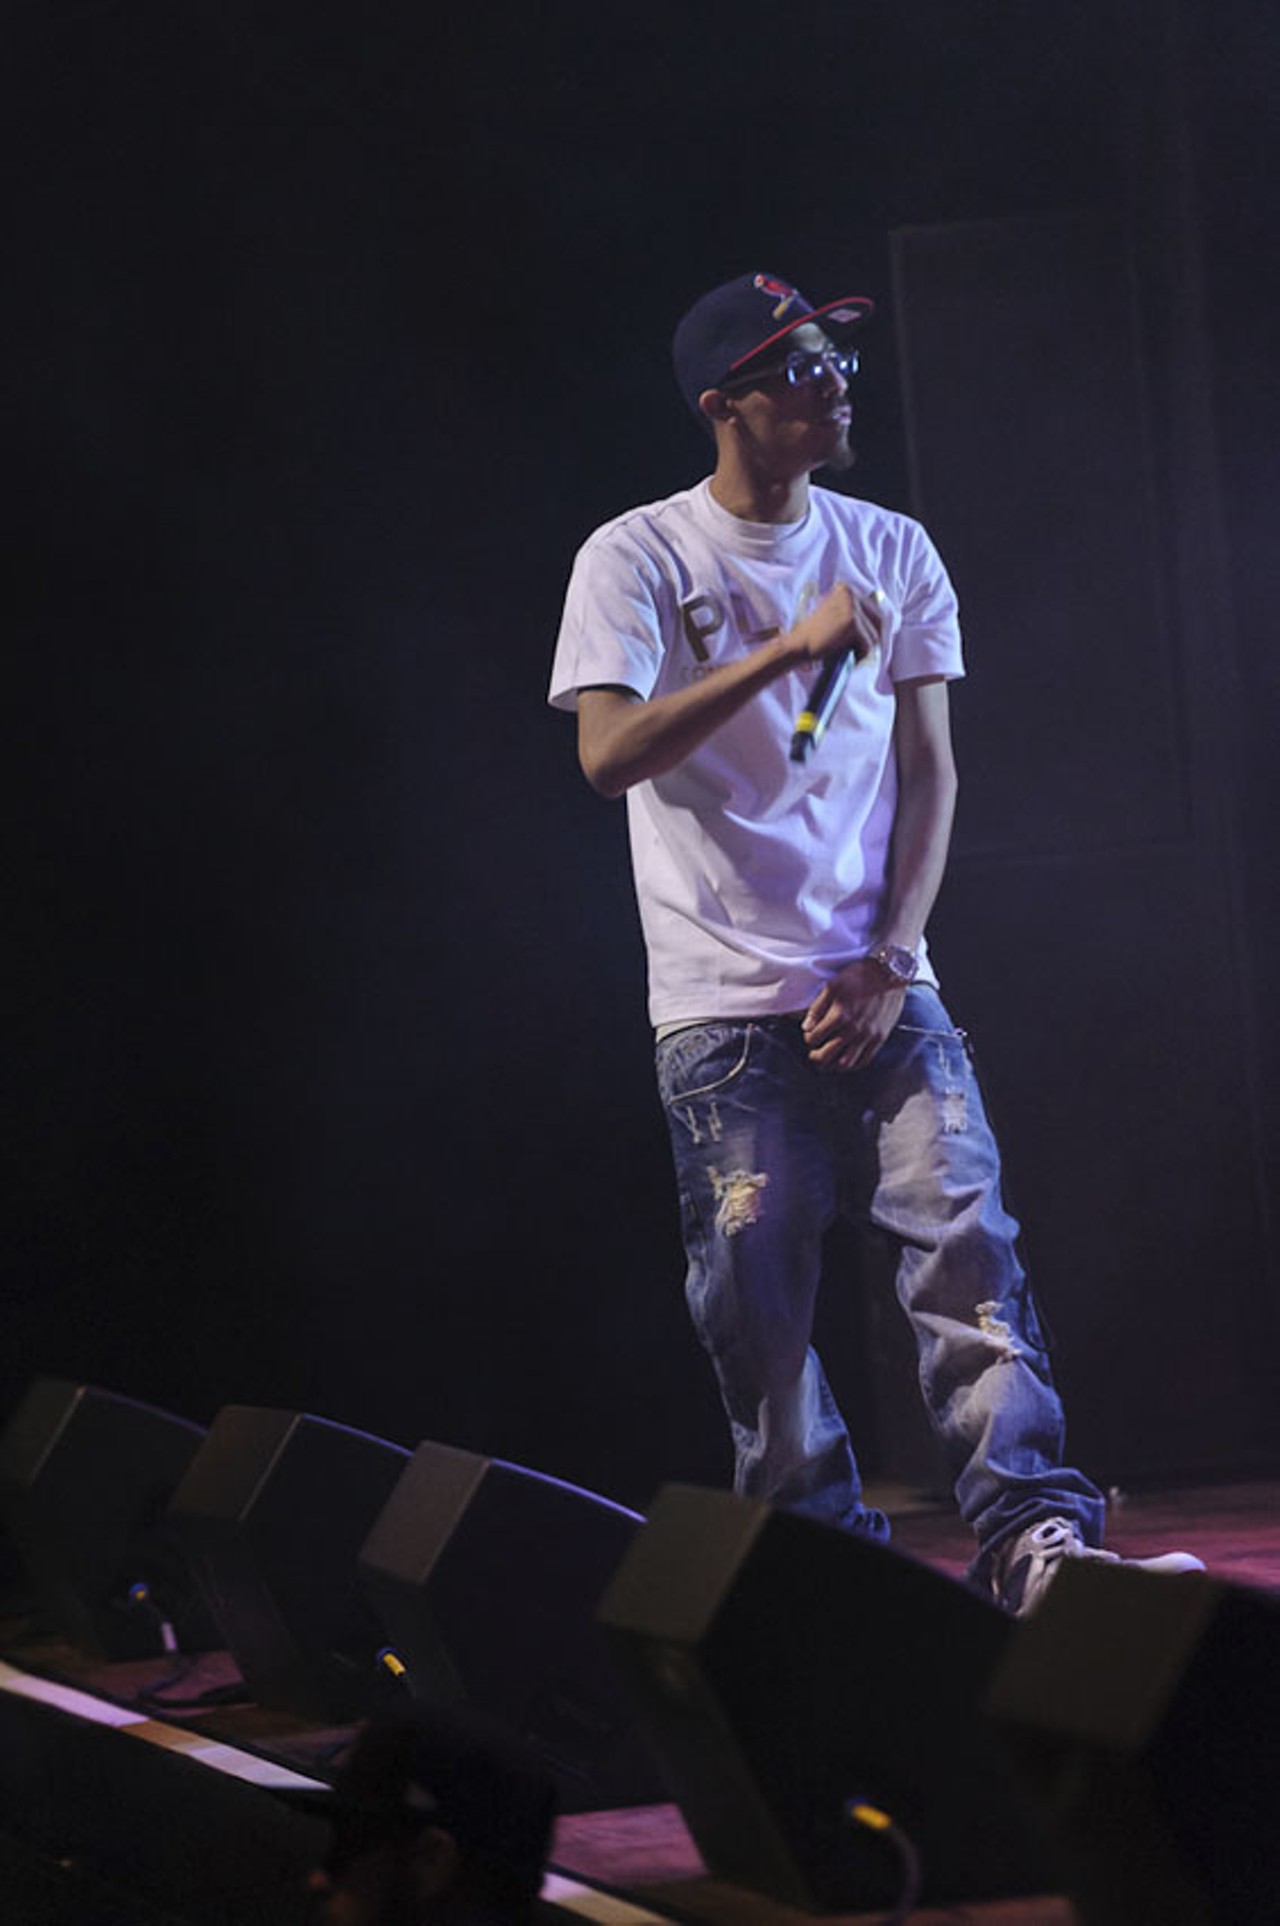 Dusty McFly, opening for Meek Mill at The Pageant.